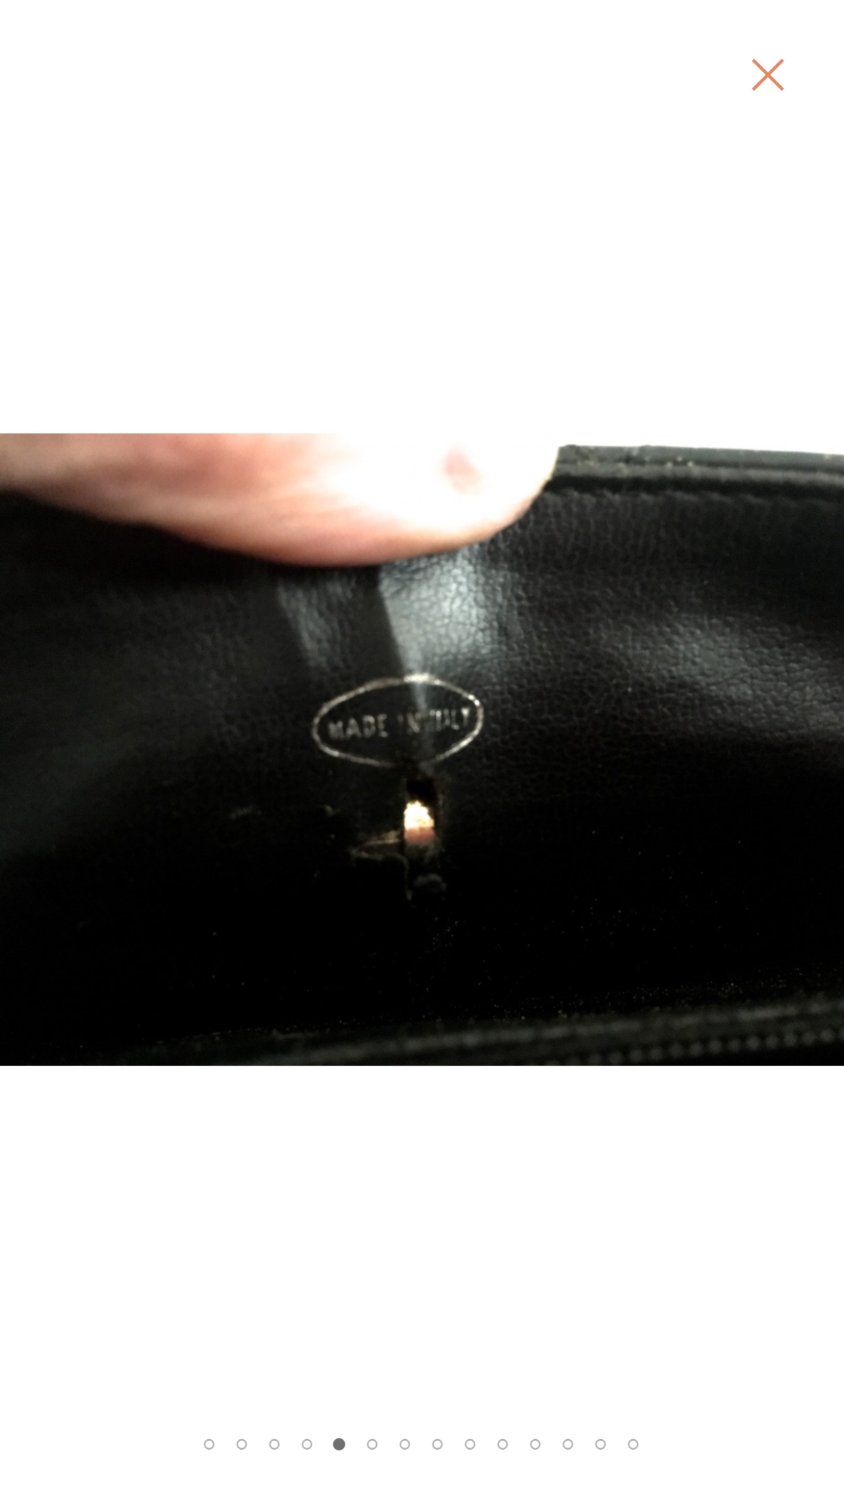 Buying A Chanel Bag Without Hologram Sticker - Bragmybag